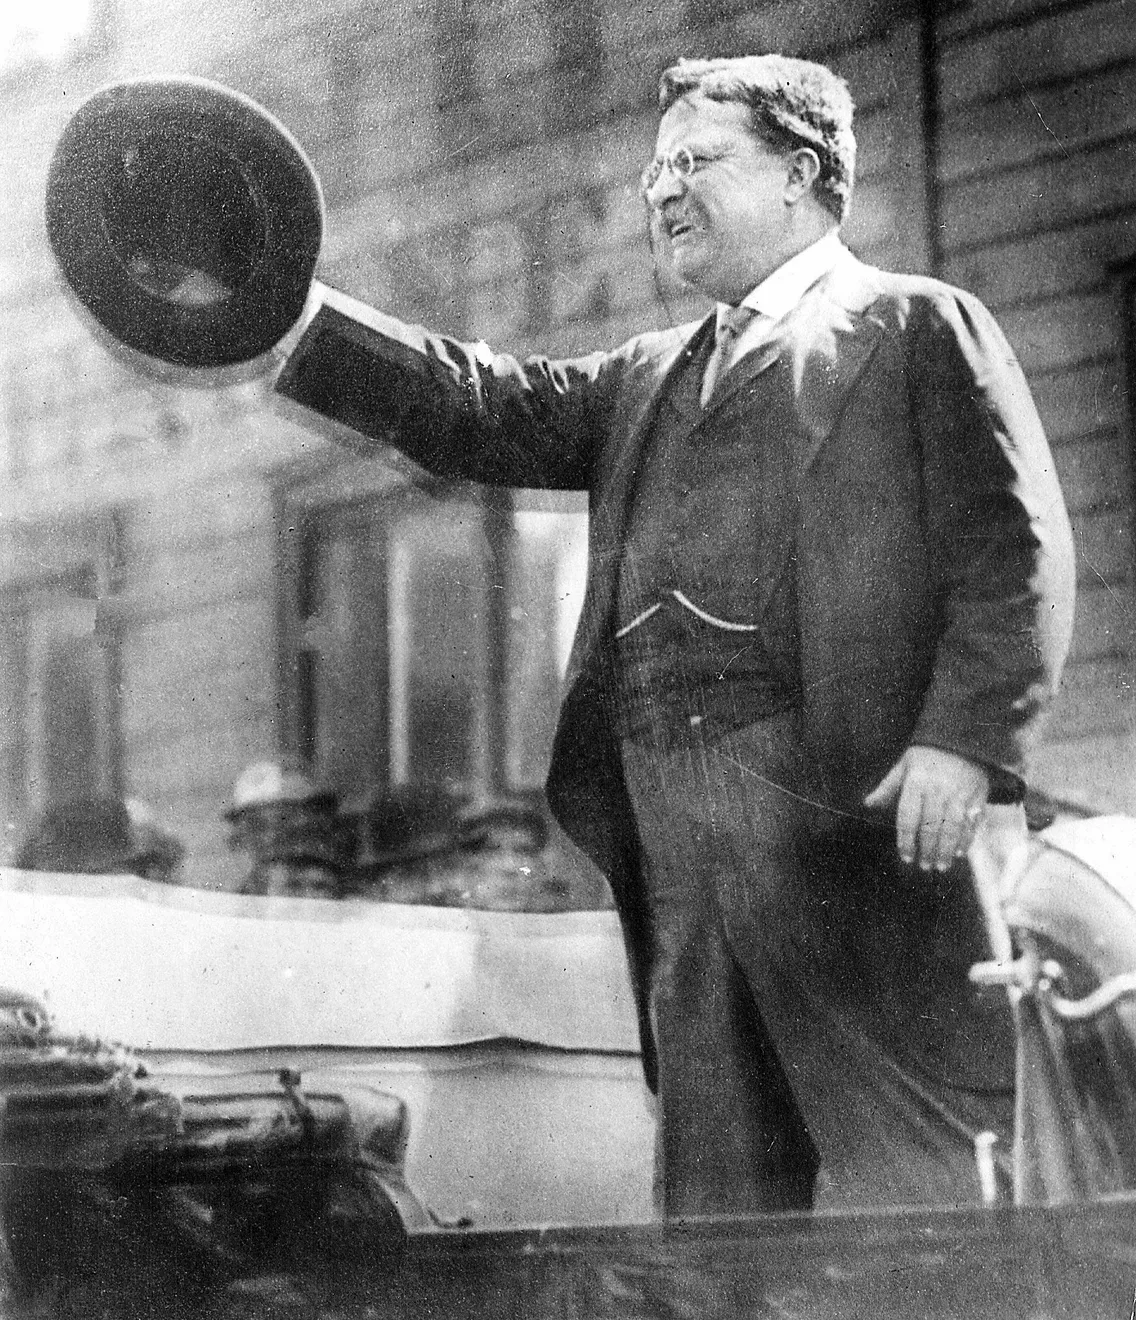 A picture of Theodore Roosevelt delivering a speech. Roosevelt survived an assassination attempt on 14 Oct. 1912 while campaigning for the US presidency.